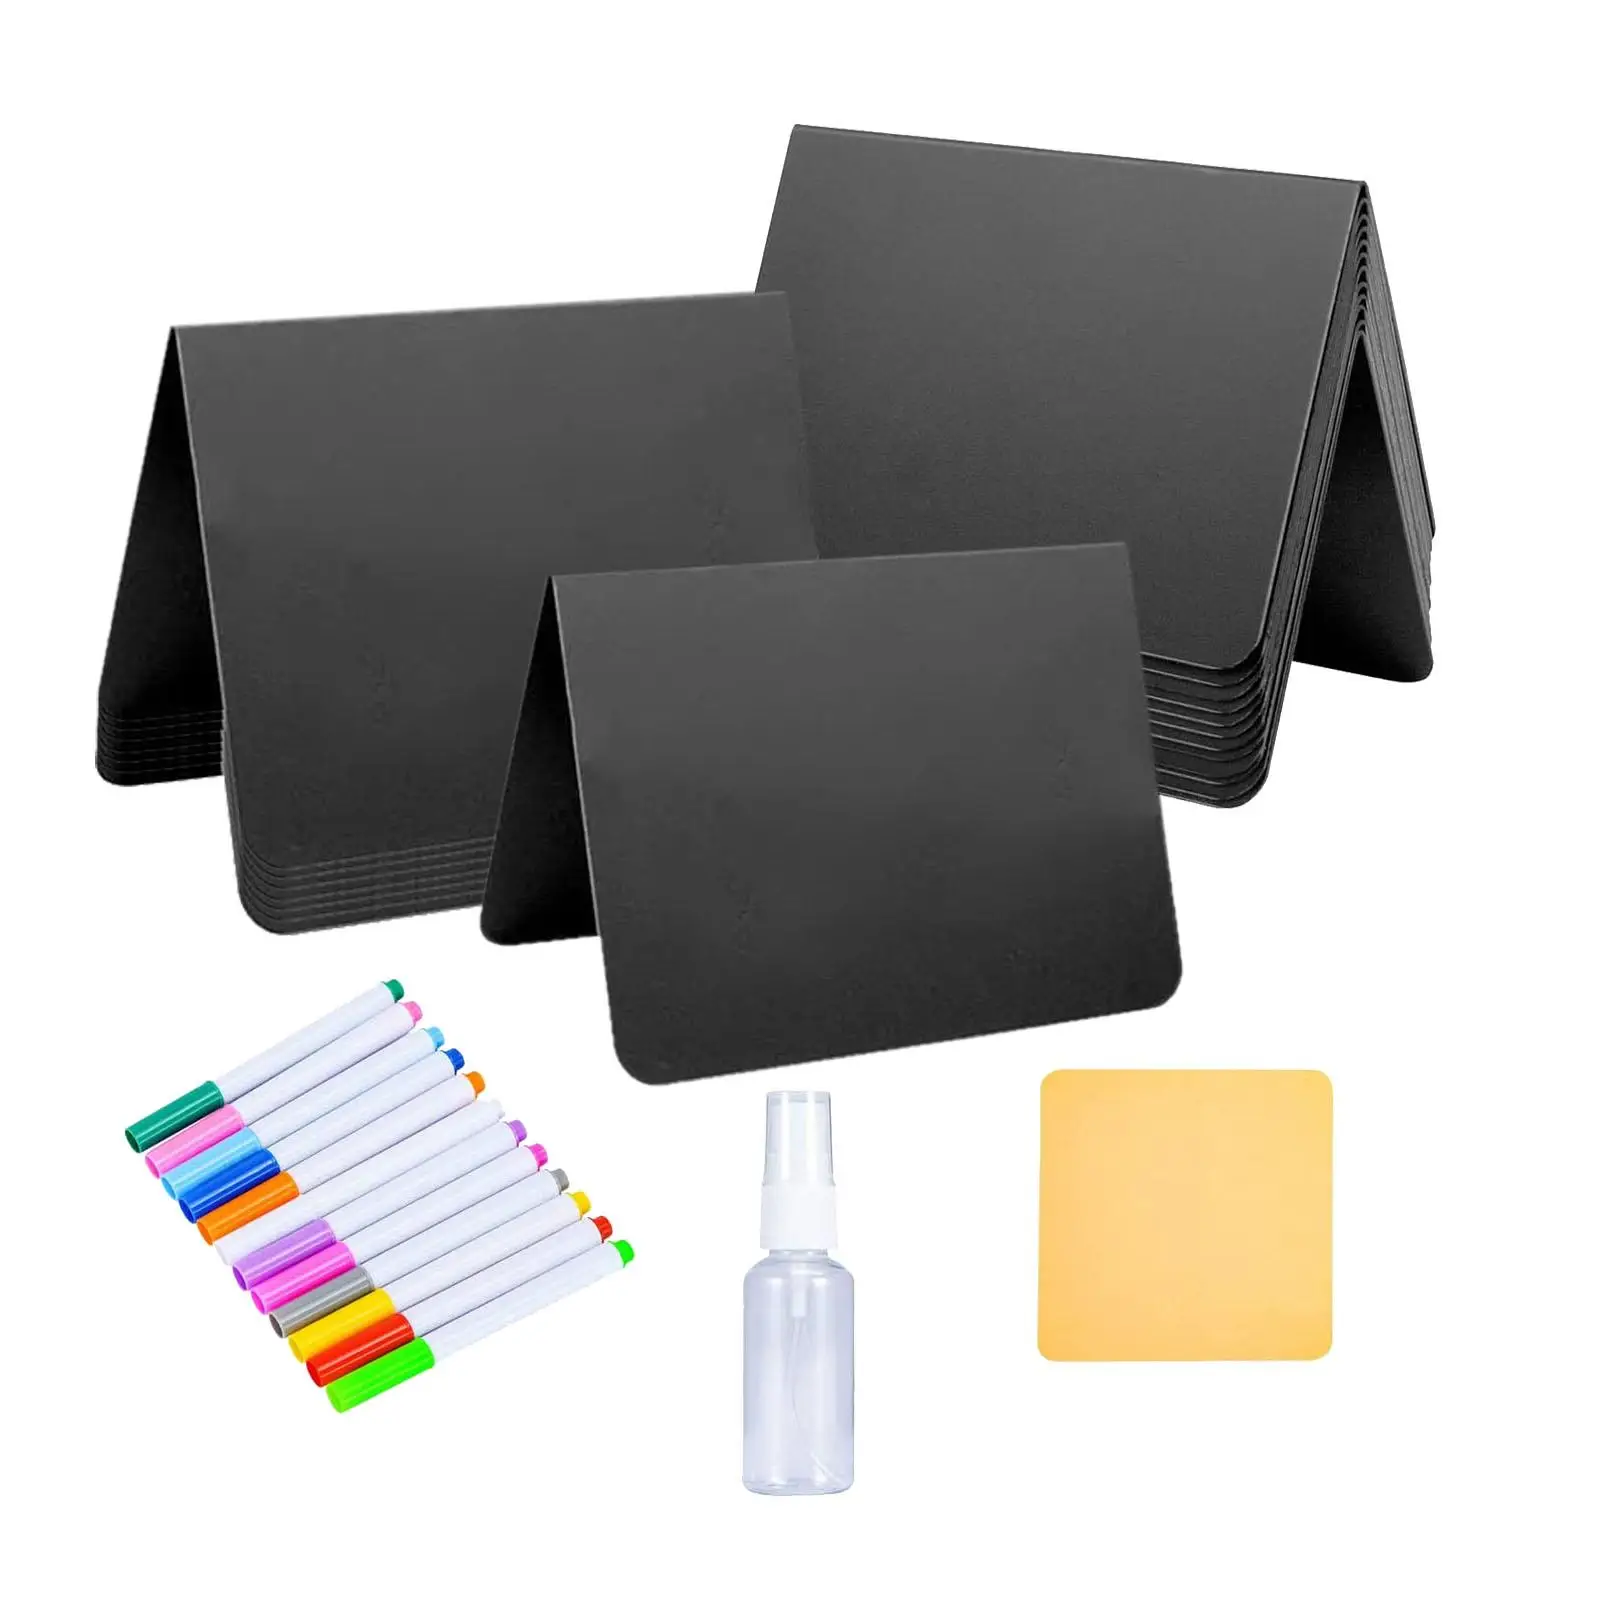 20Pcs Mini Chalkboard Signs for Food Easy to Write and Wipe Reusable Place Cards for Table Numbers Weddings Retail Label Parties